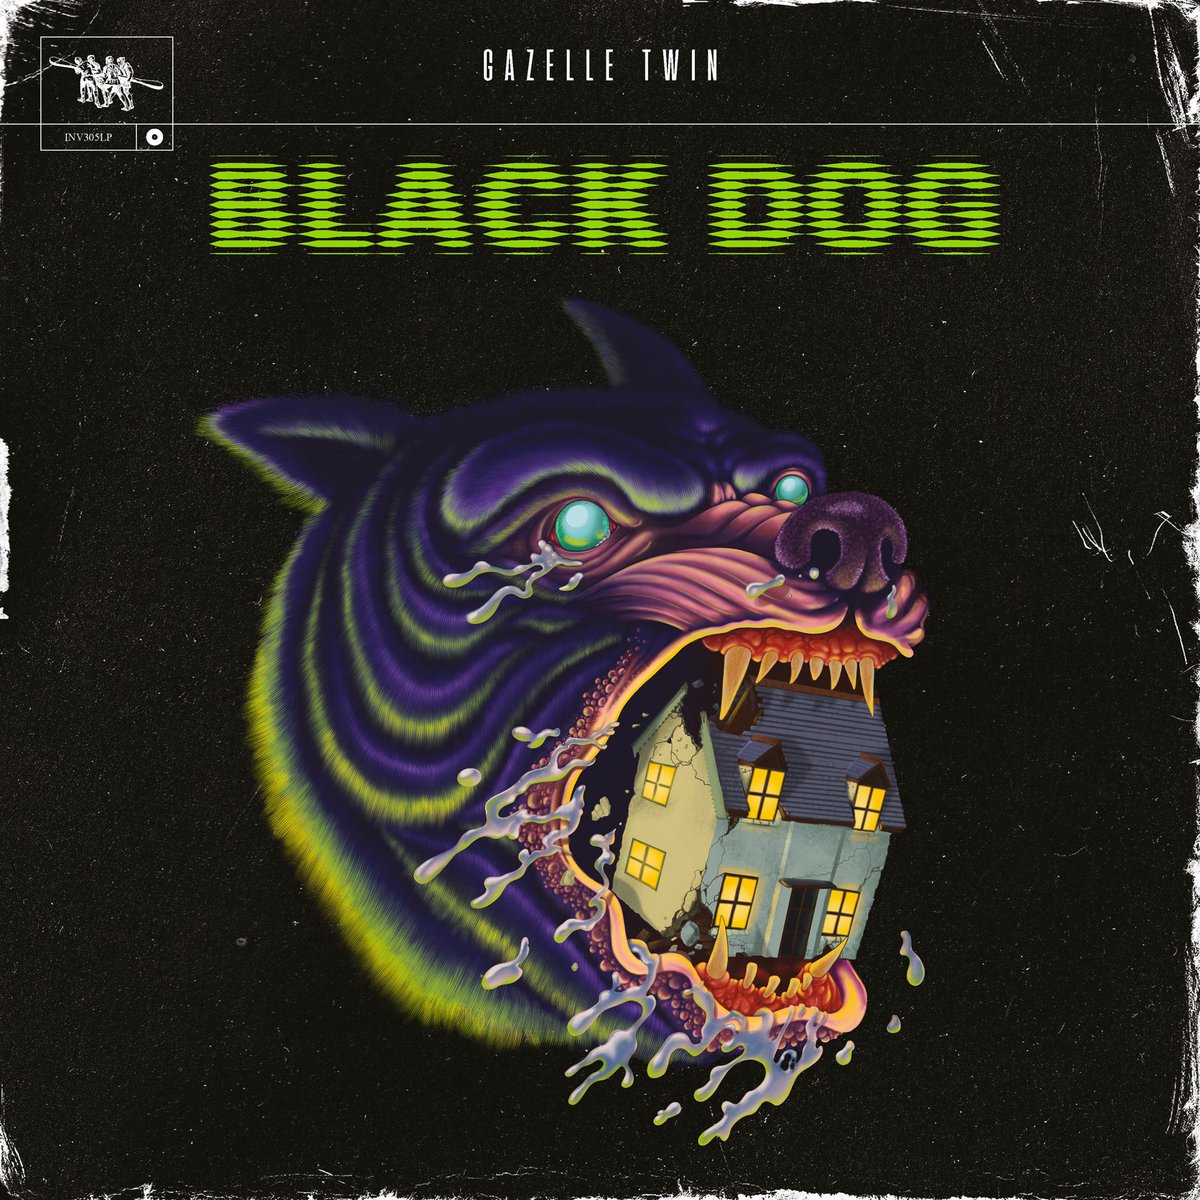 Black Dog is loose! Listen live now on @maryannehobbs @BBC6Music - more stuff to follow…